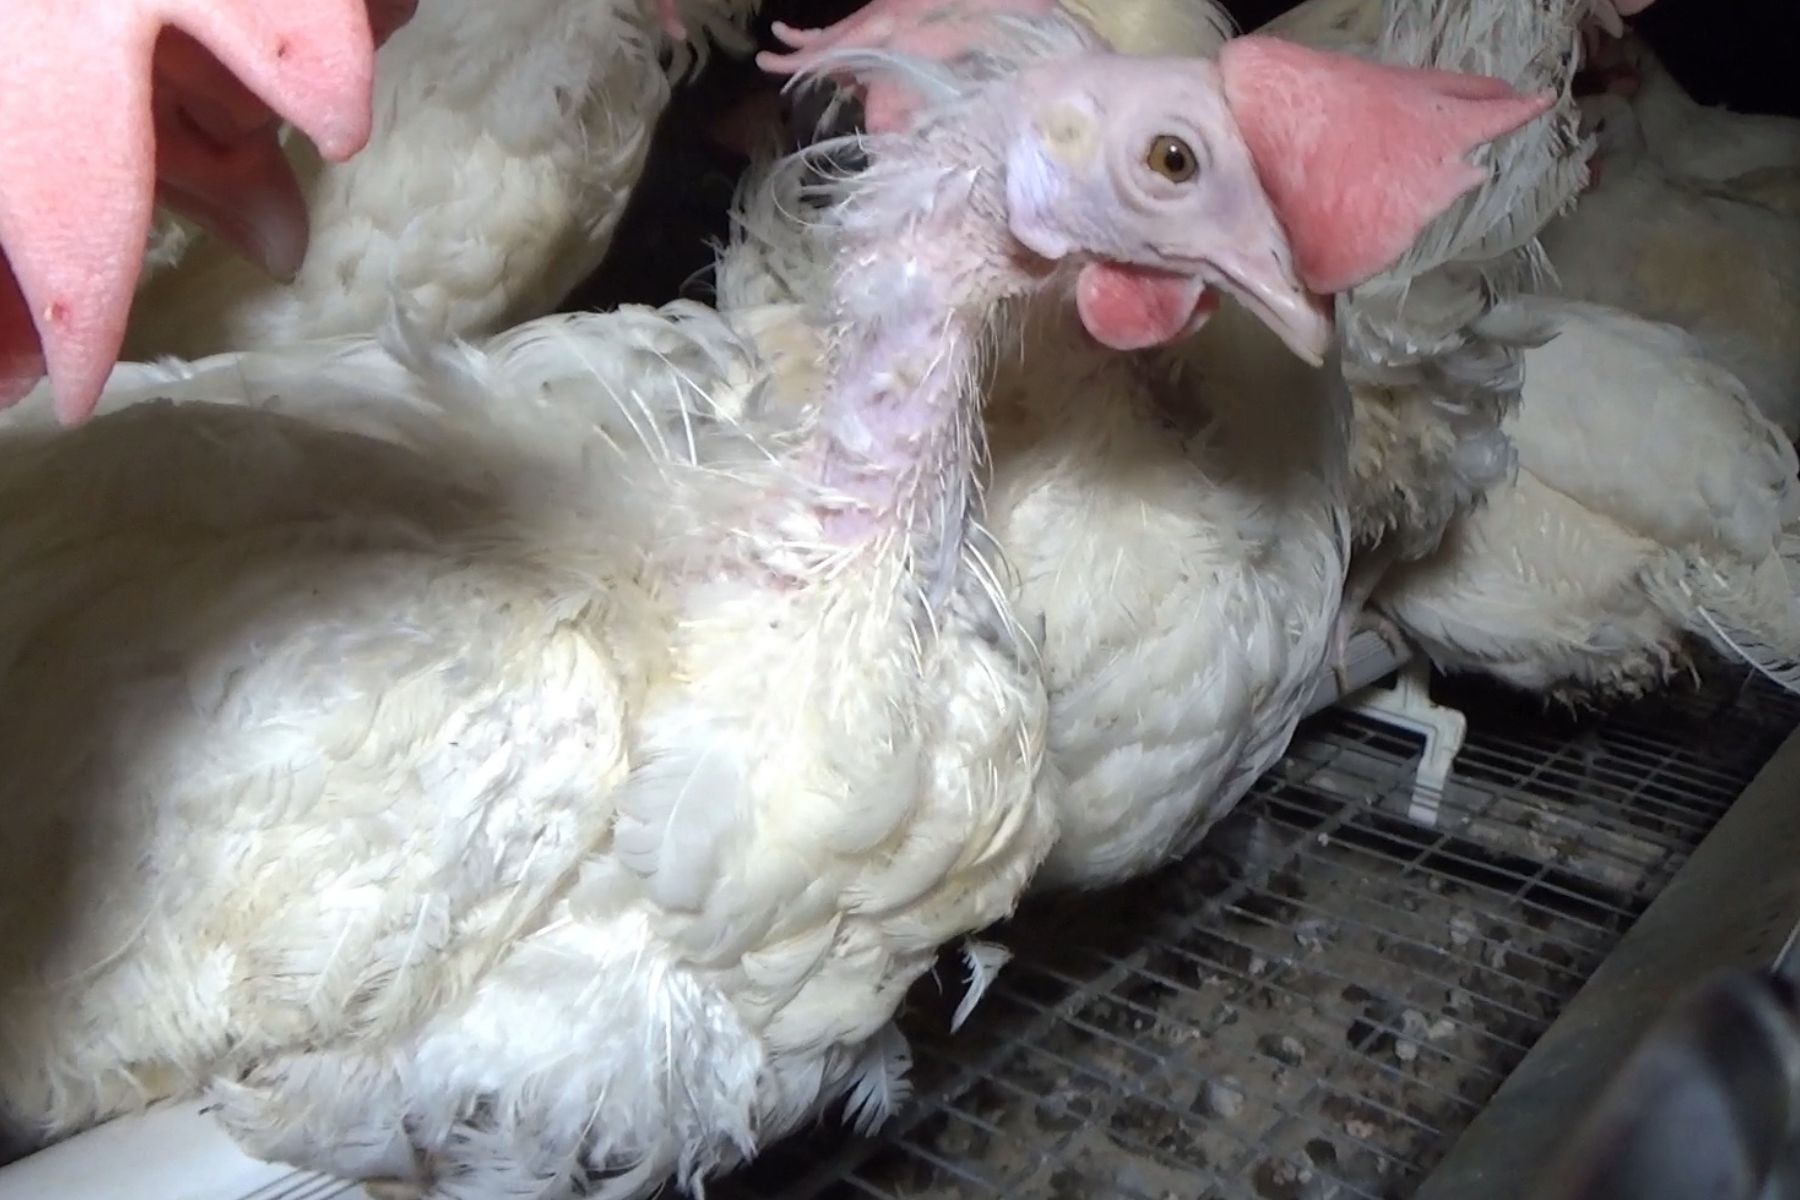 Egg-laying hen in cage suffers from feather loss.